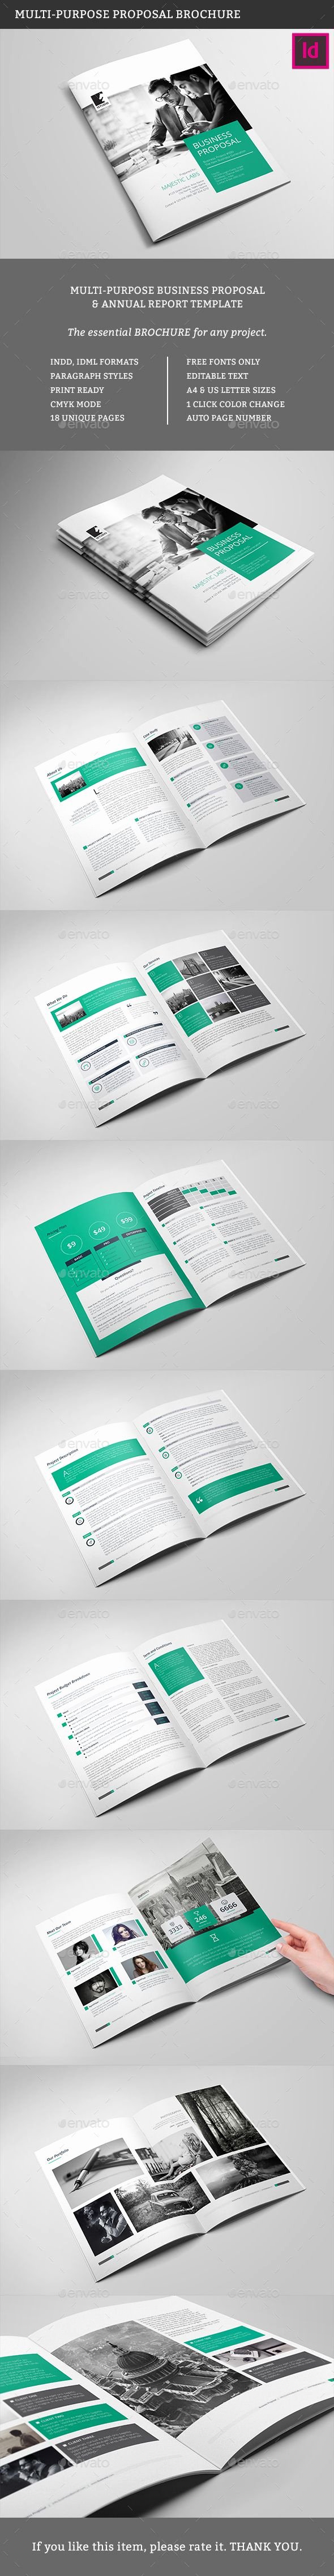 White Paper Template Indesign Lovely 11 Best Images About White Paper Designs On Pinterest